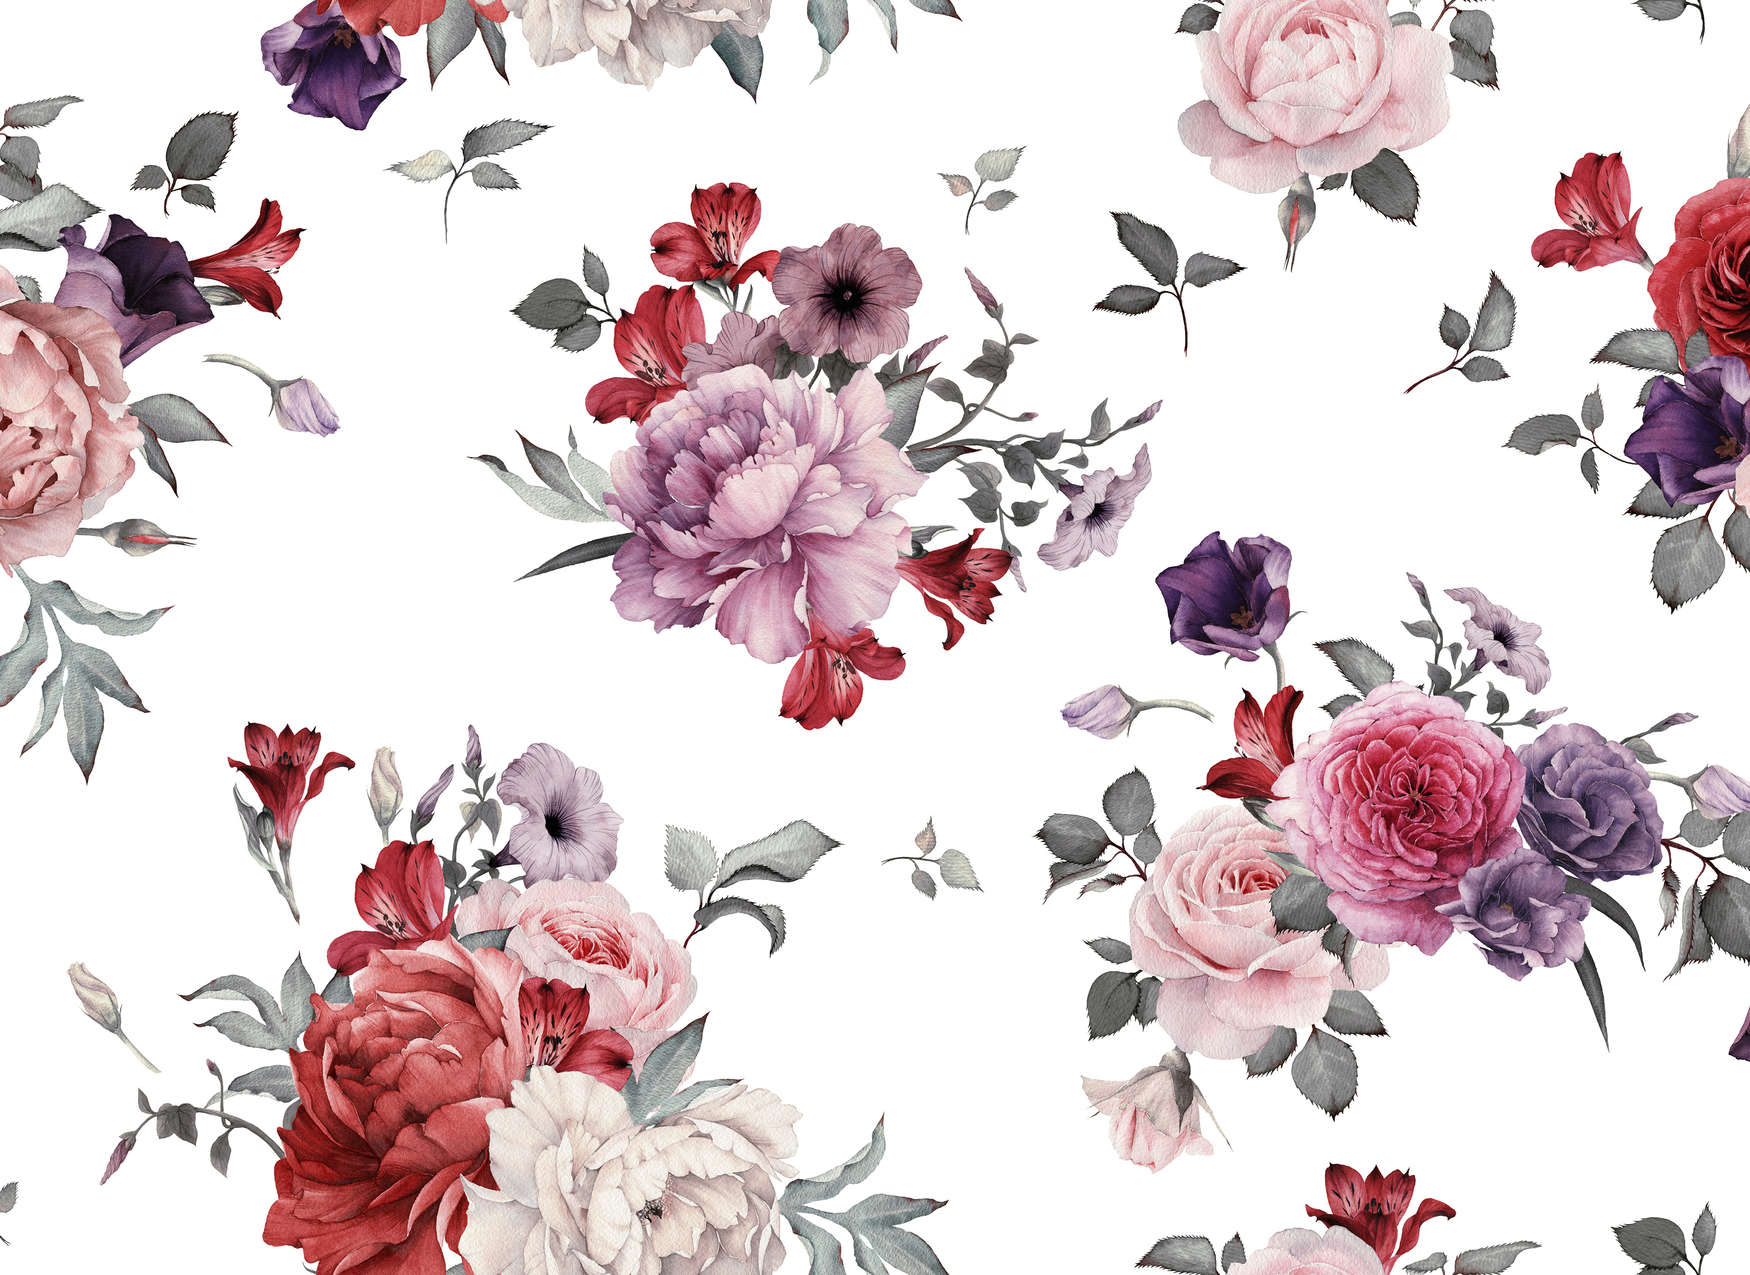             Romantic Flowers Wallpaper - Pink, White, Red
        